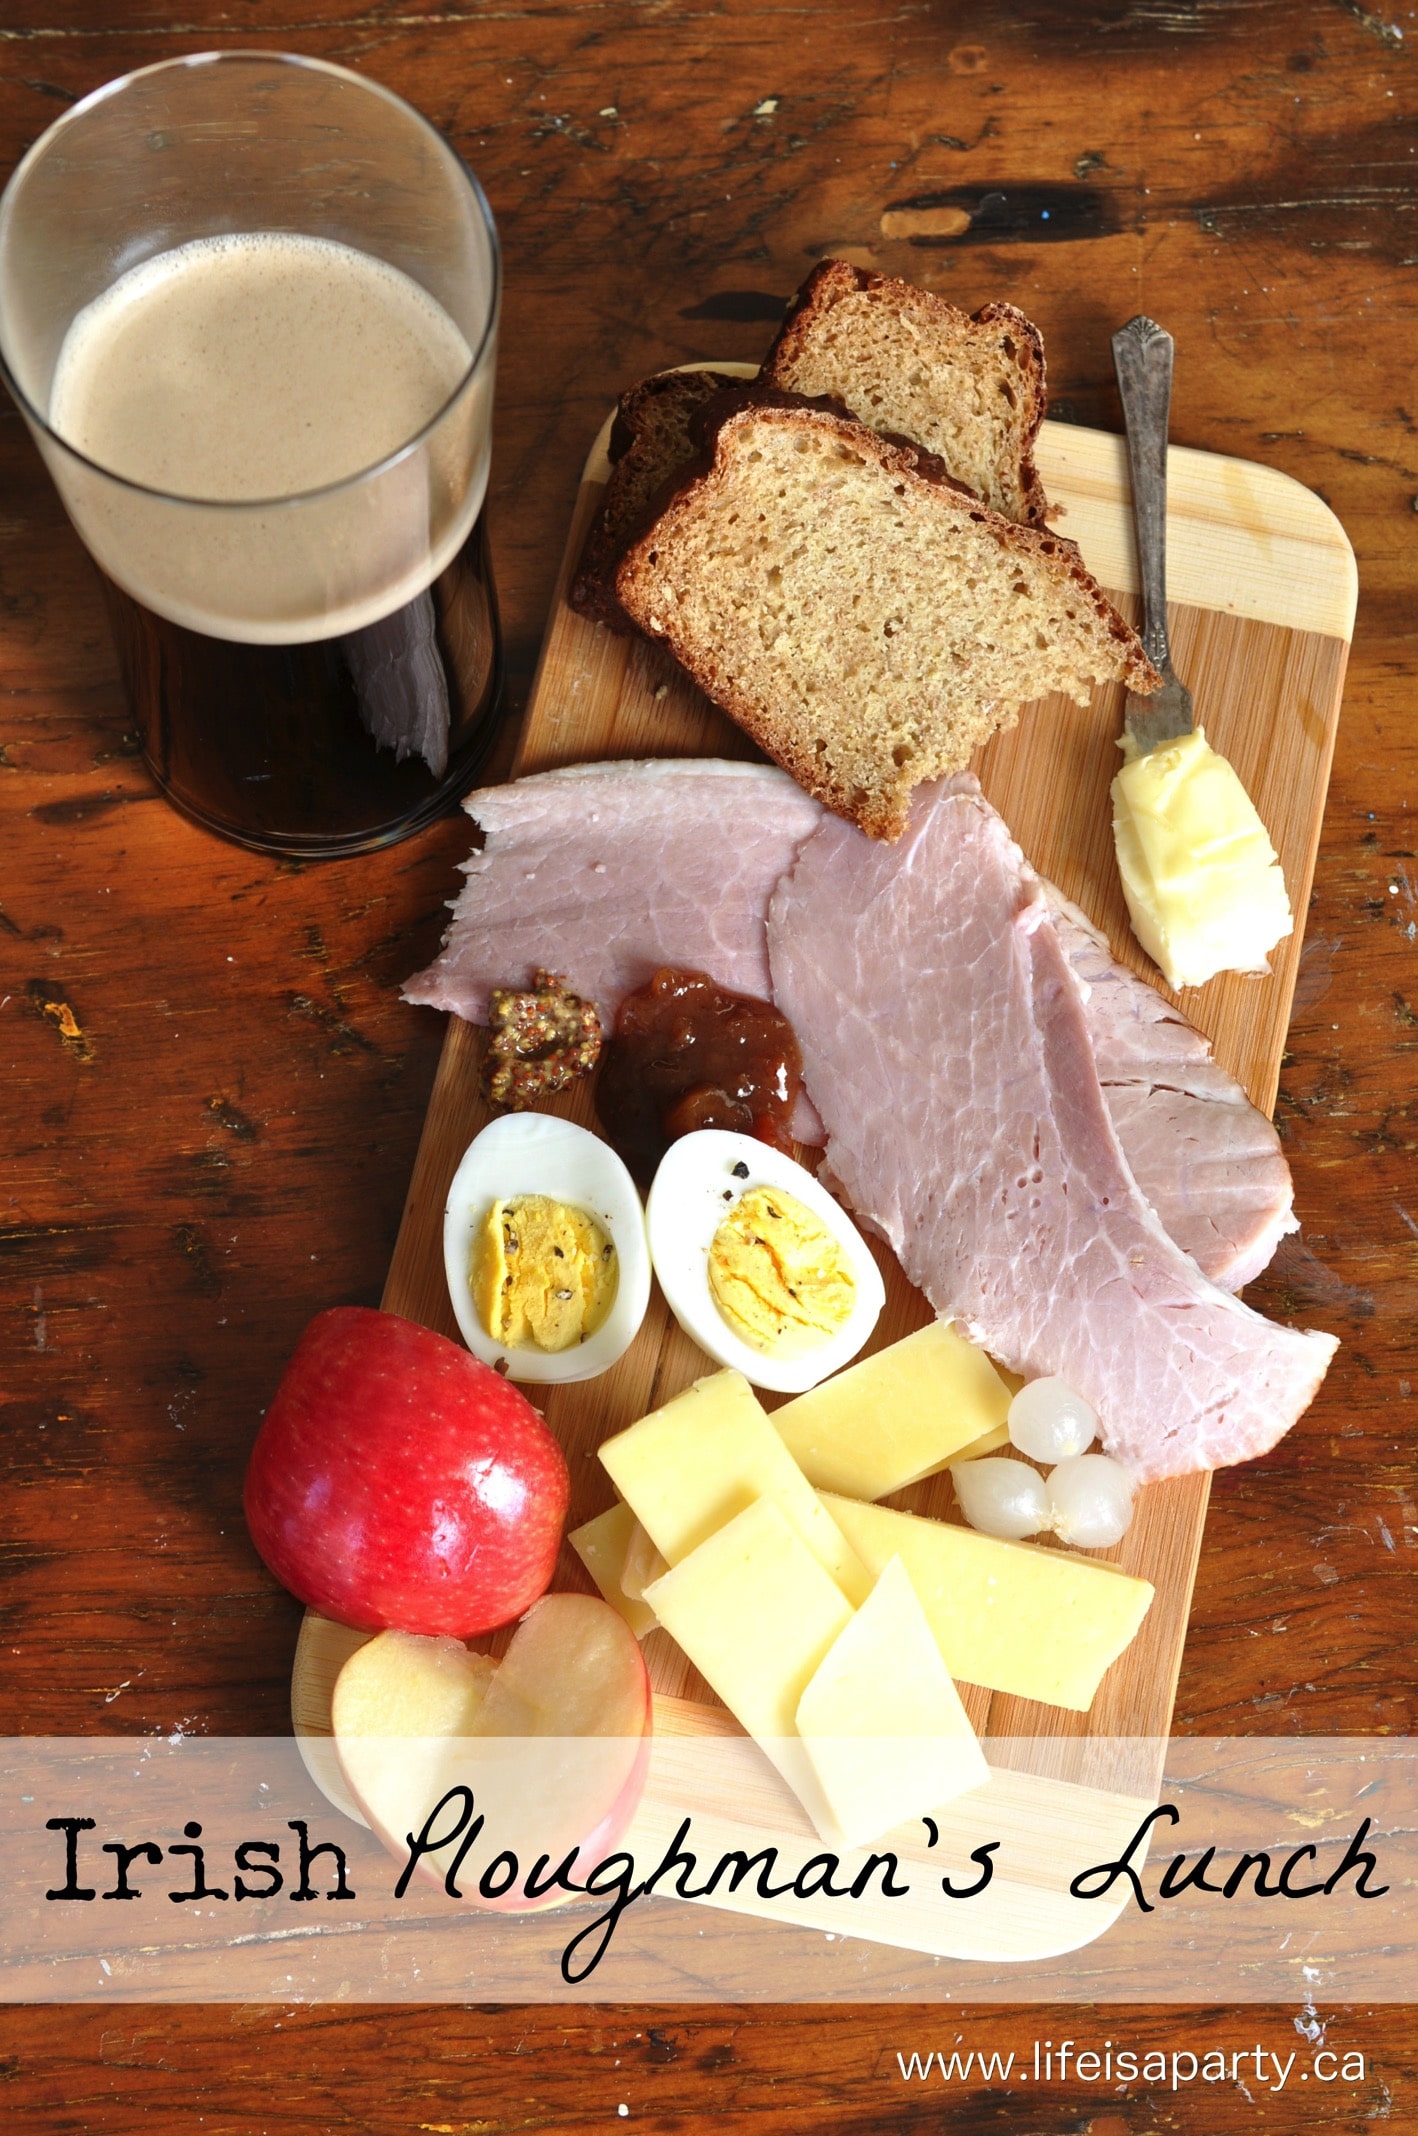 Irish Ploughman's Lunch: The perfect easy and delicious way to celebrate St. Patrick's Day, with a really simple Brown Irish Soda Bread recipe included.